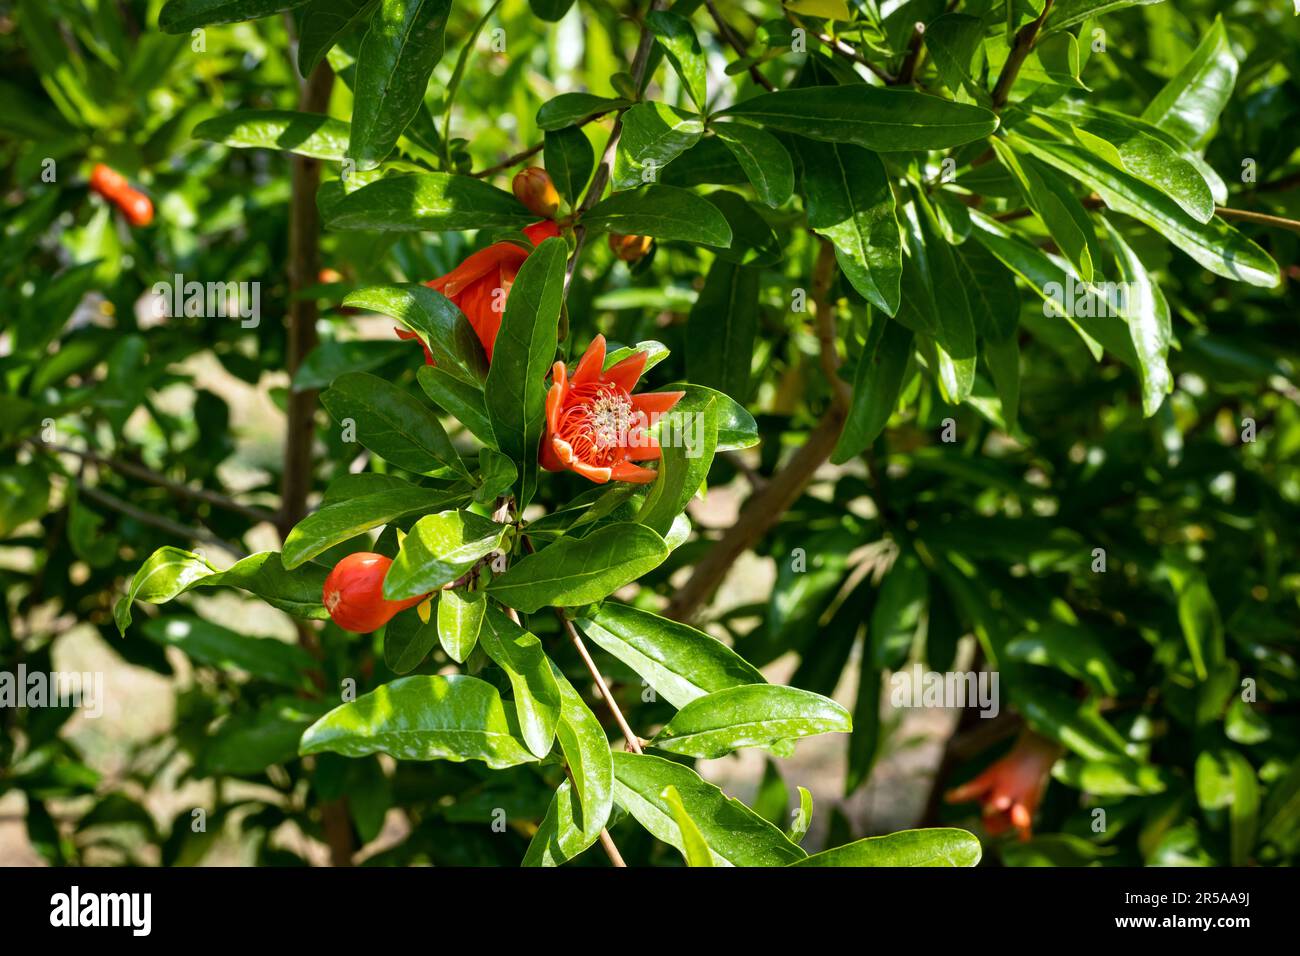 Pomegranate flowers in the garden. Punica granatum tree or red pomegranate branch and bright orange, fresh flowers, with yellow stamens. Stock Photo